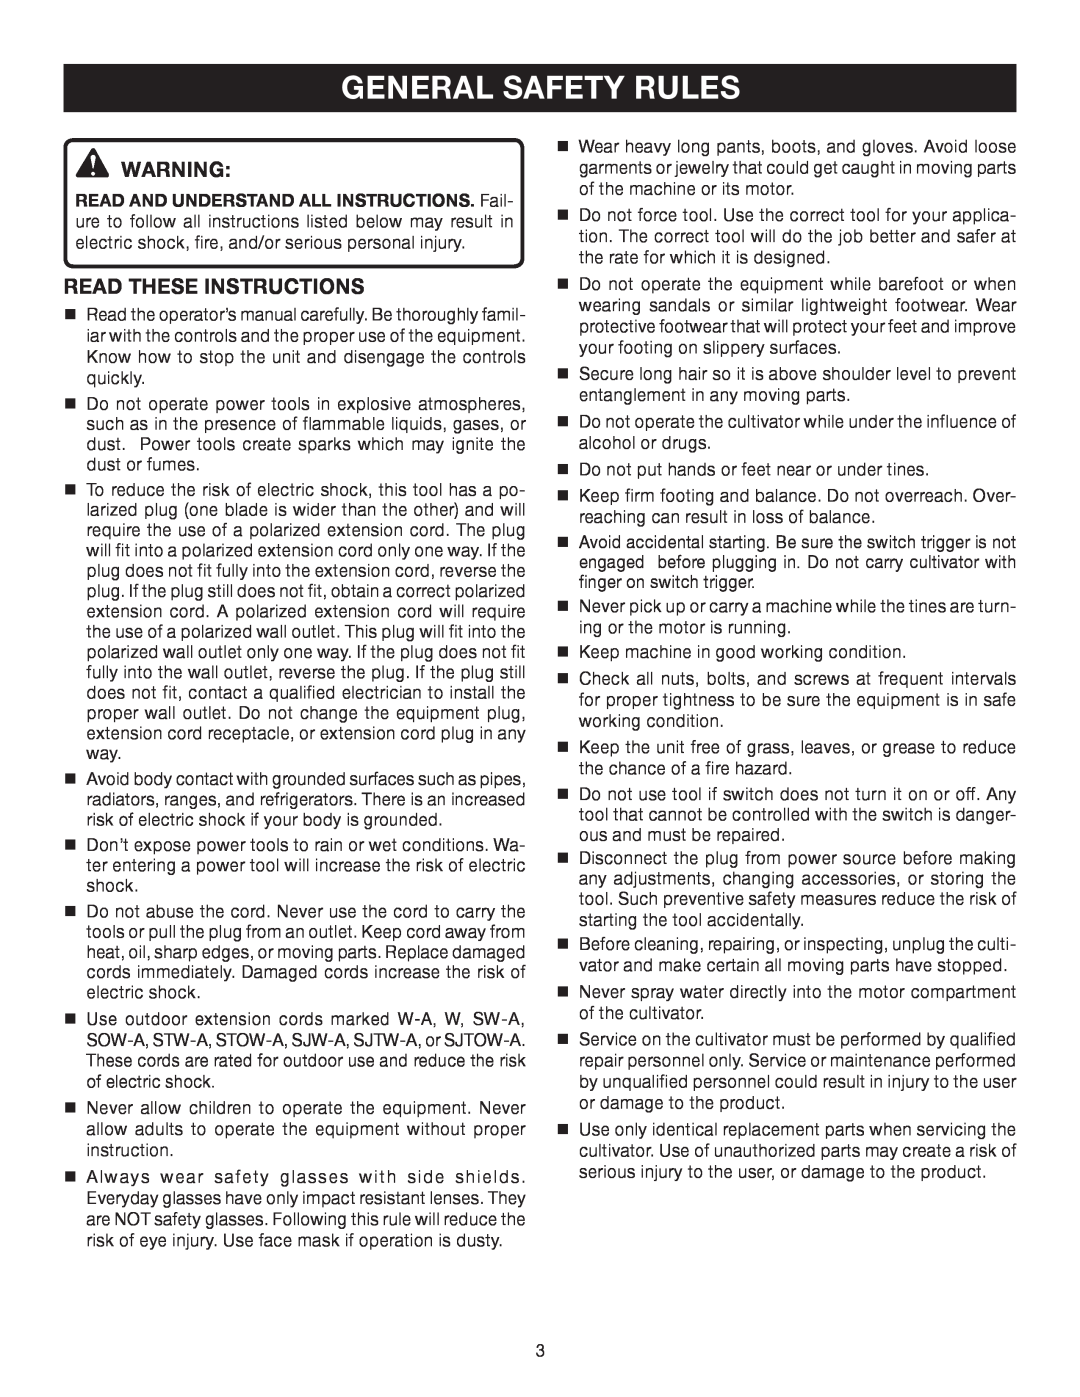 Ryobi Outdoor RY46501B manual General Safety Rules, Read These Instructions 